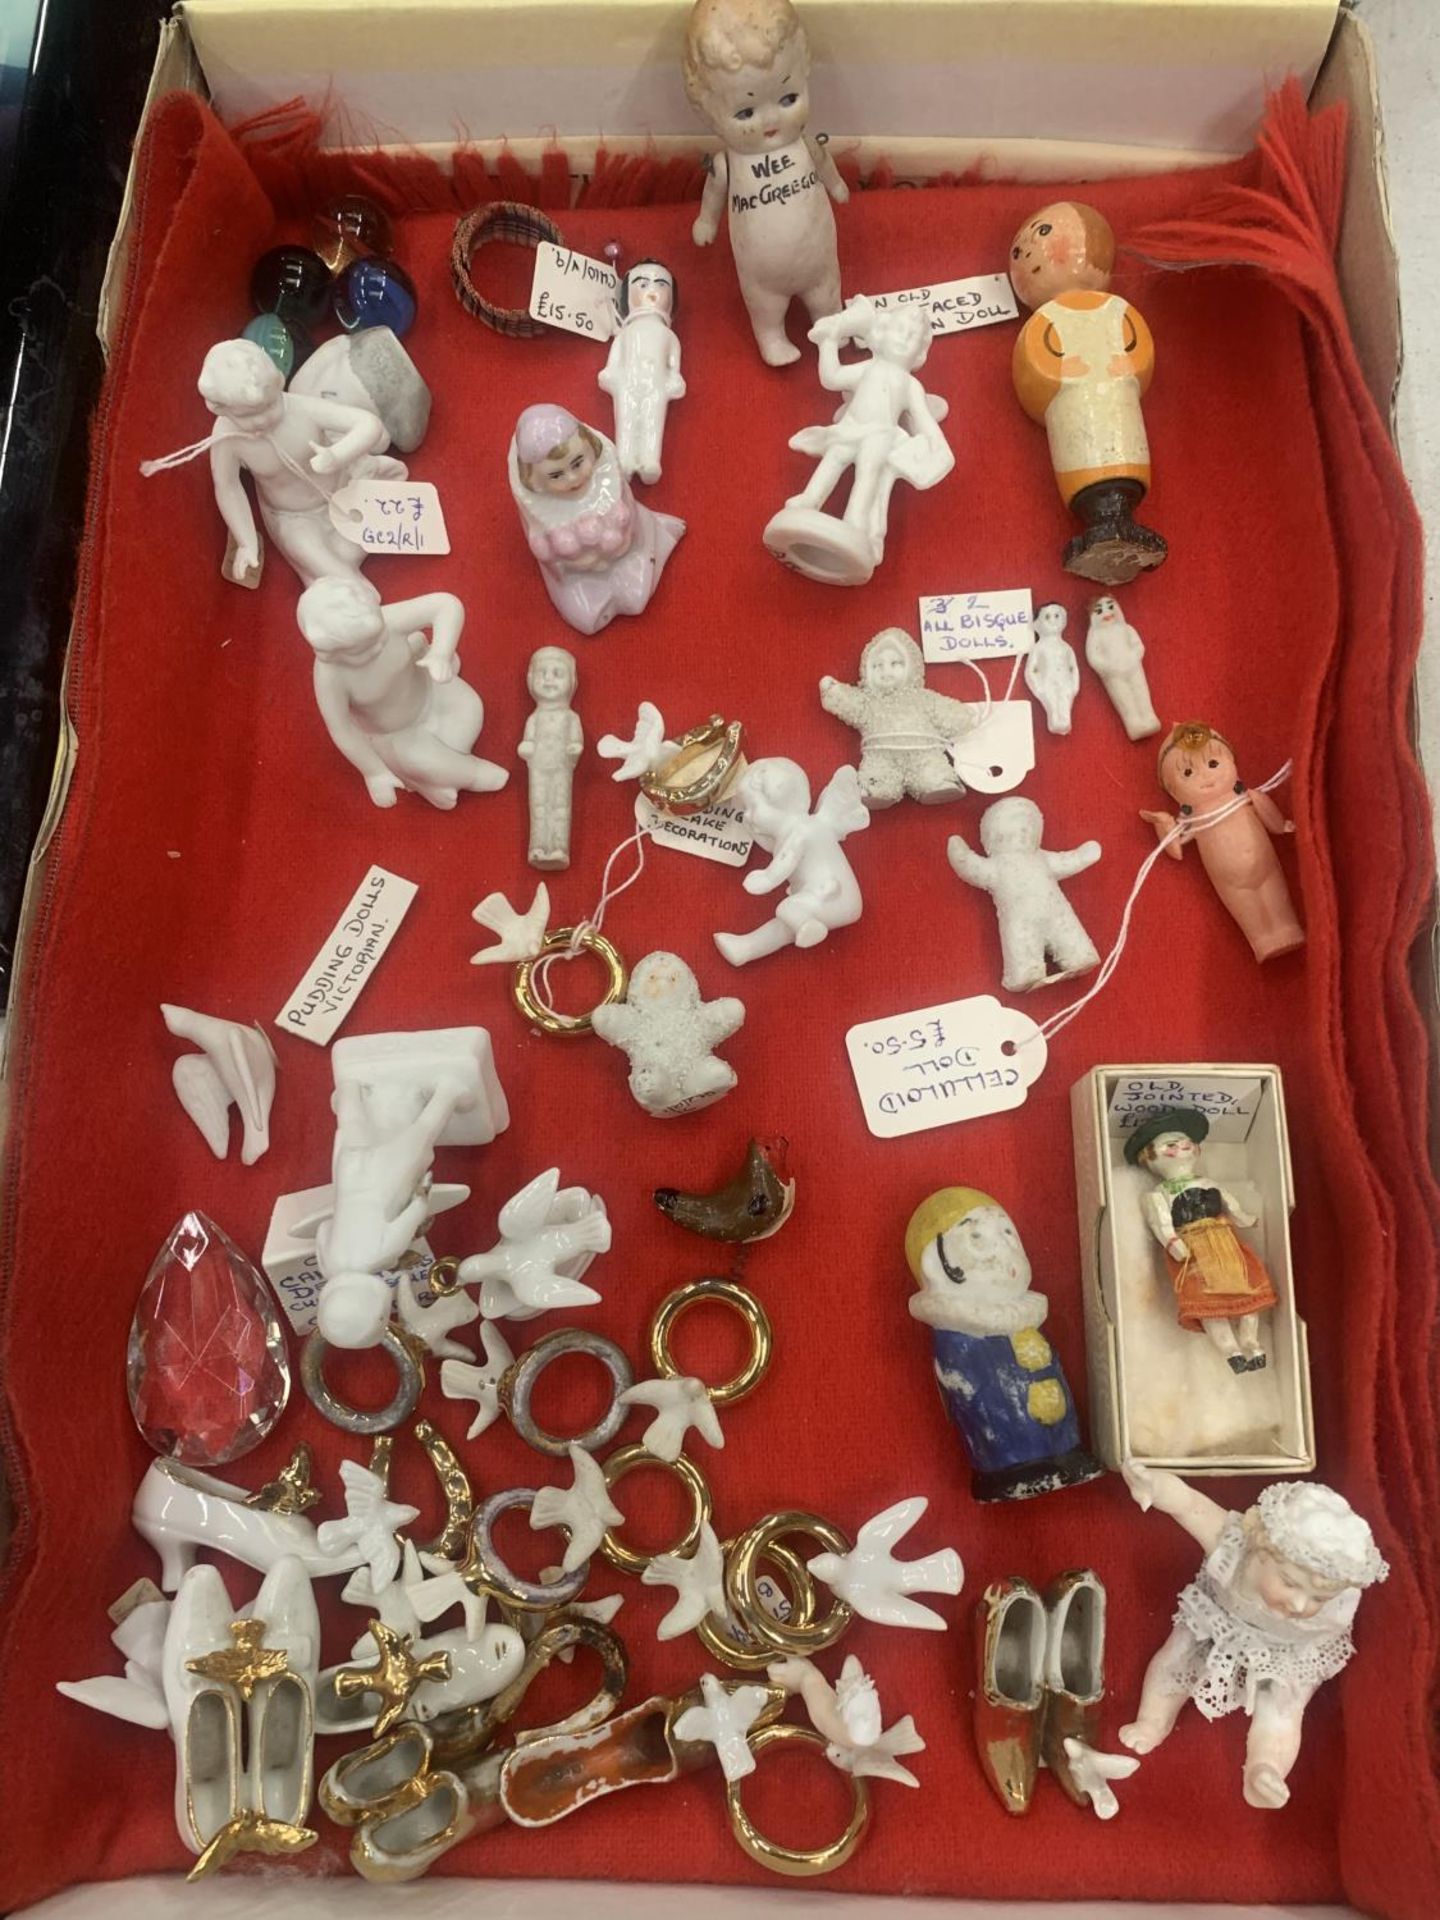 A COLLECTION OF VINTAGE MINIATURES TO INCLUDE CELLULOID DOLLS, BISQUE DOLLS, CAKE DECORATIONS, ETC